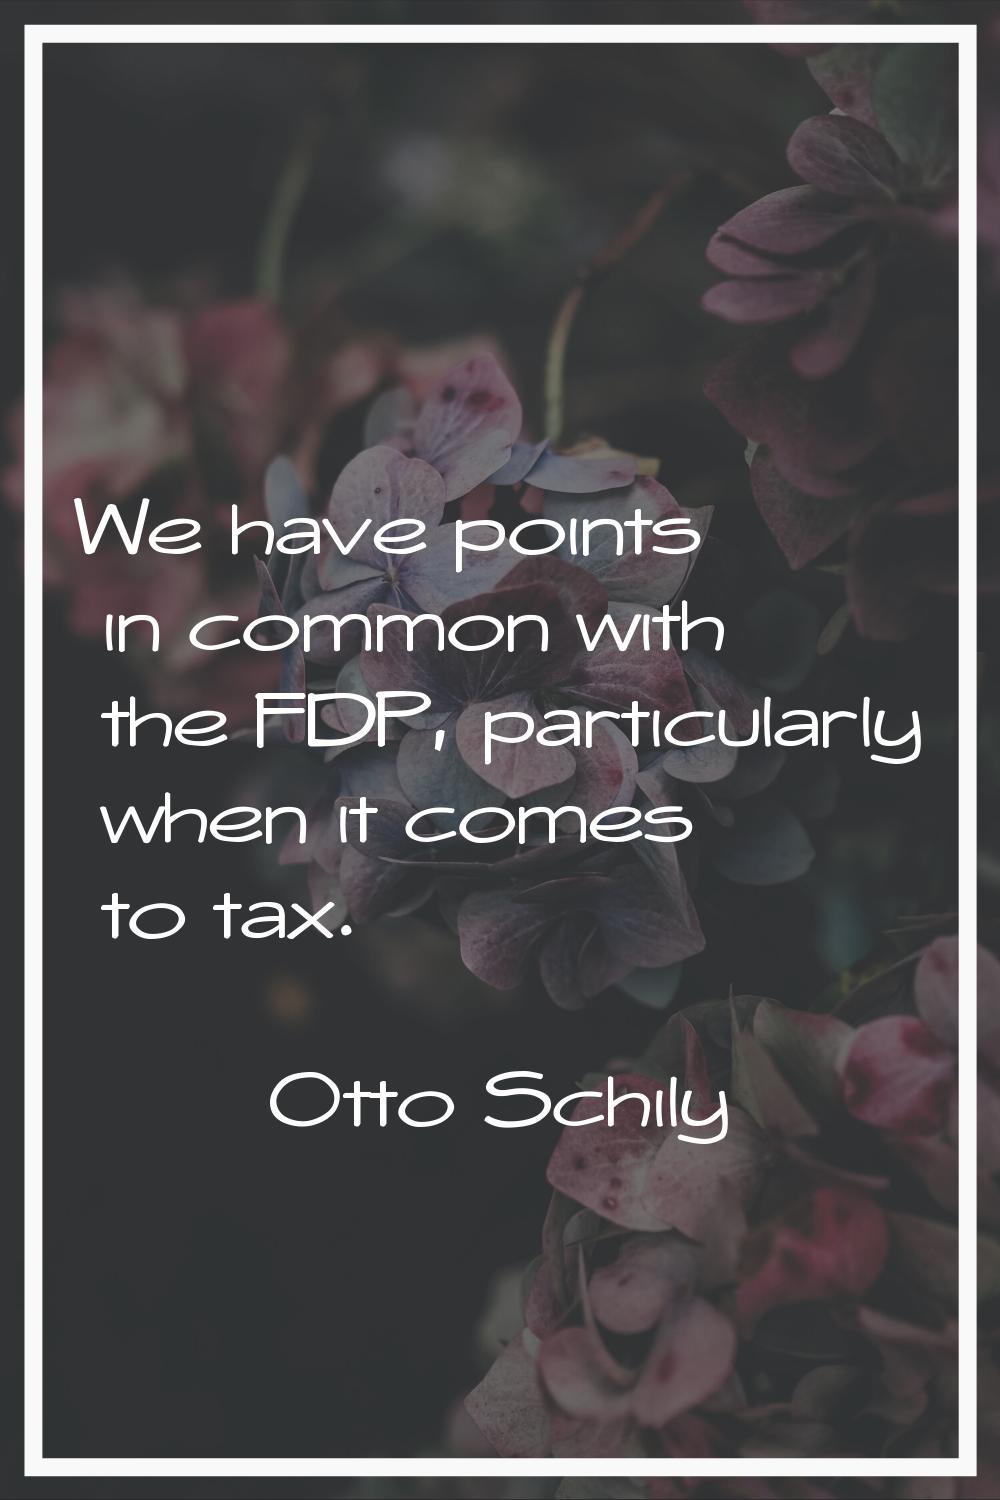 We have points in common with the FDP, particularly when it comes to tax.